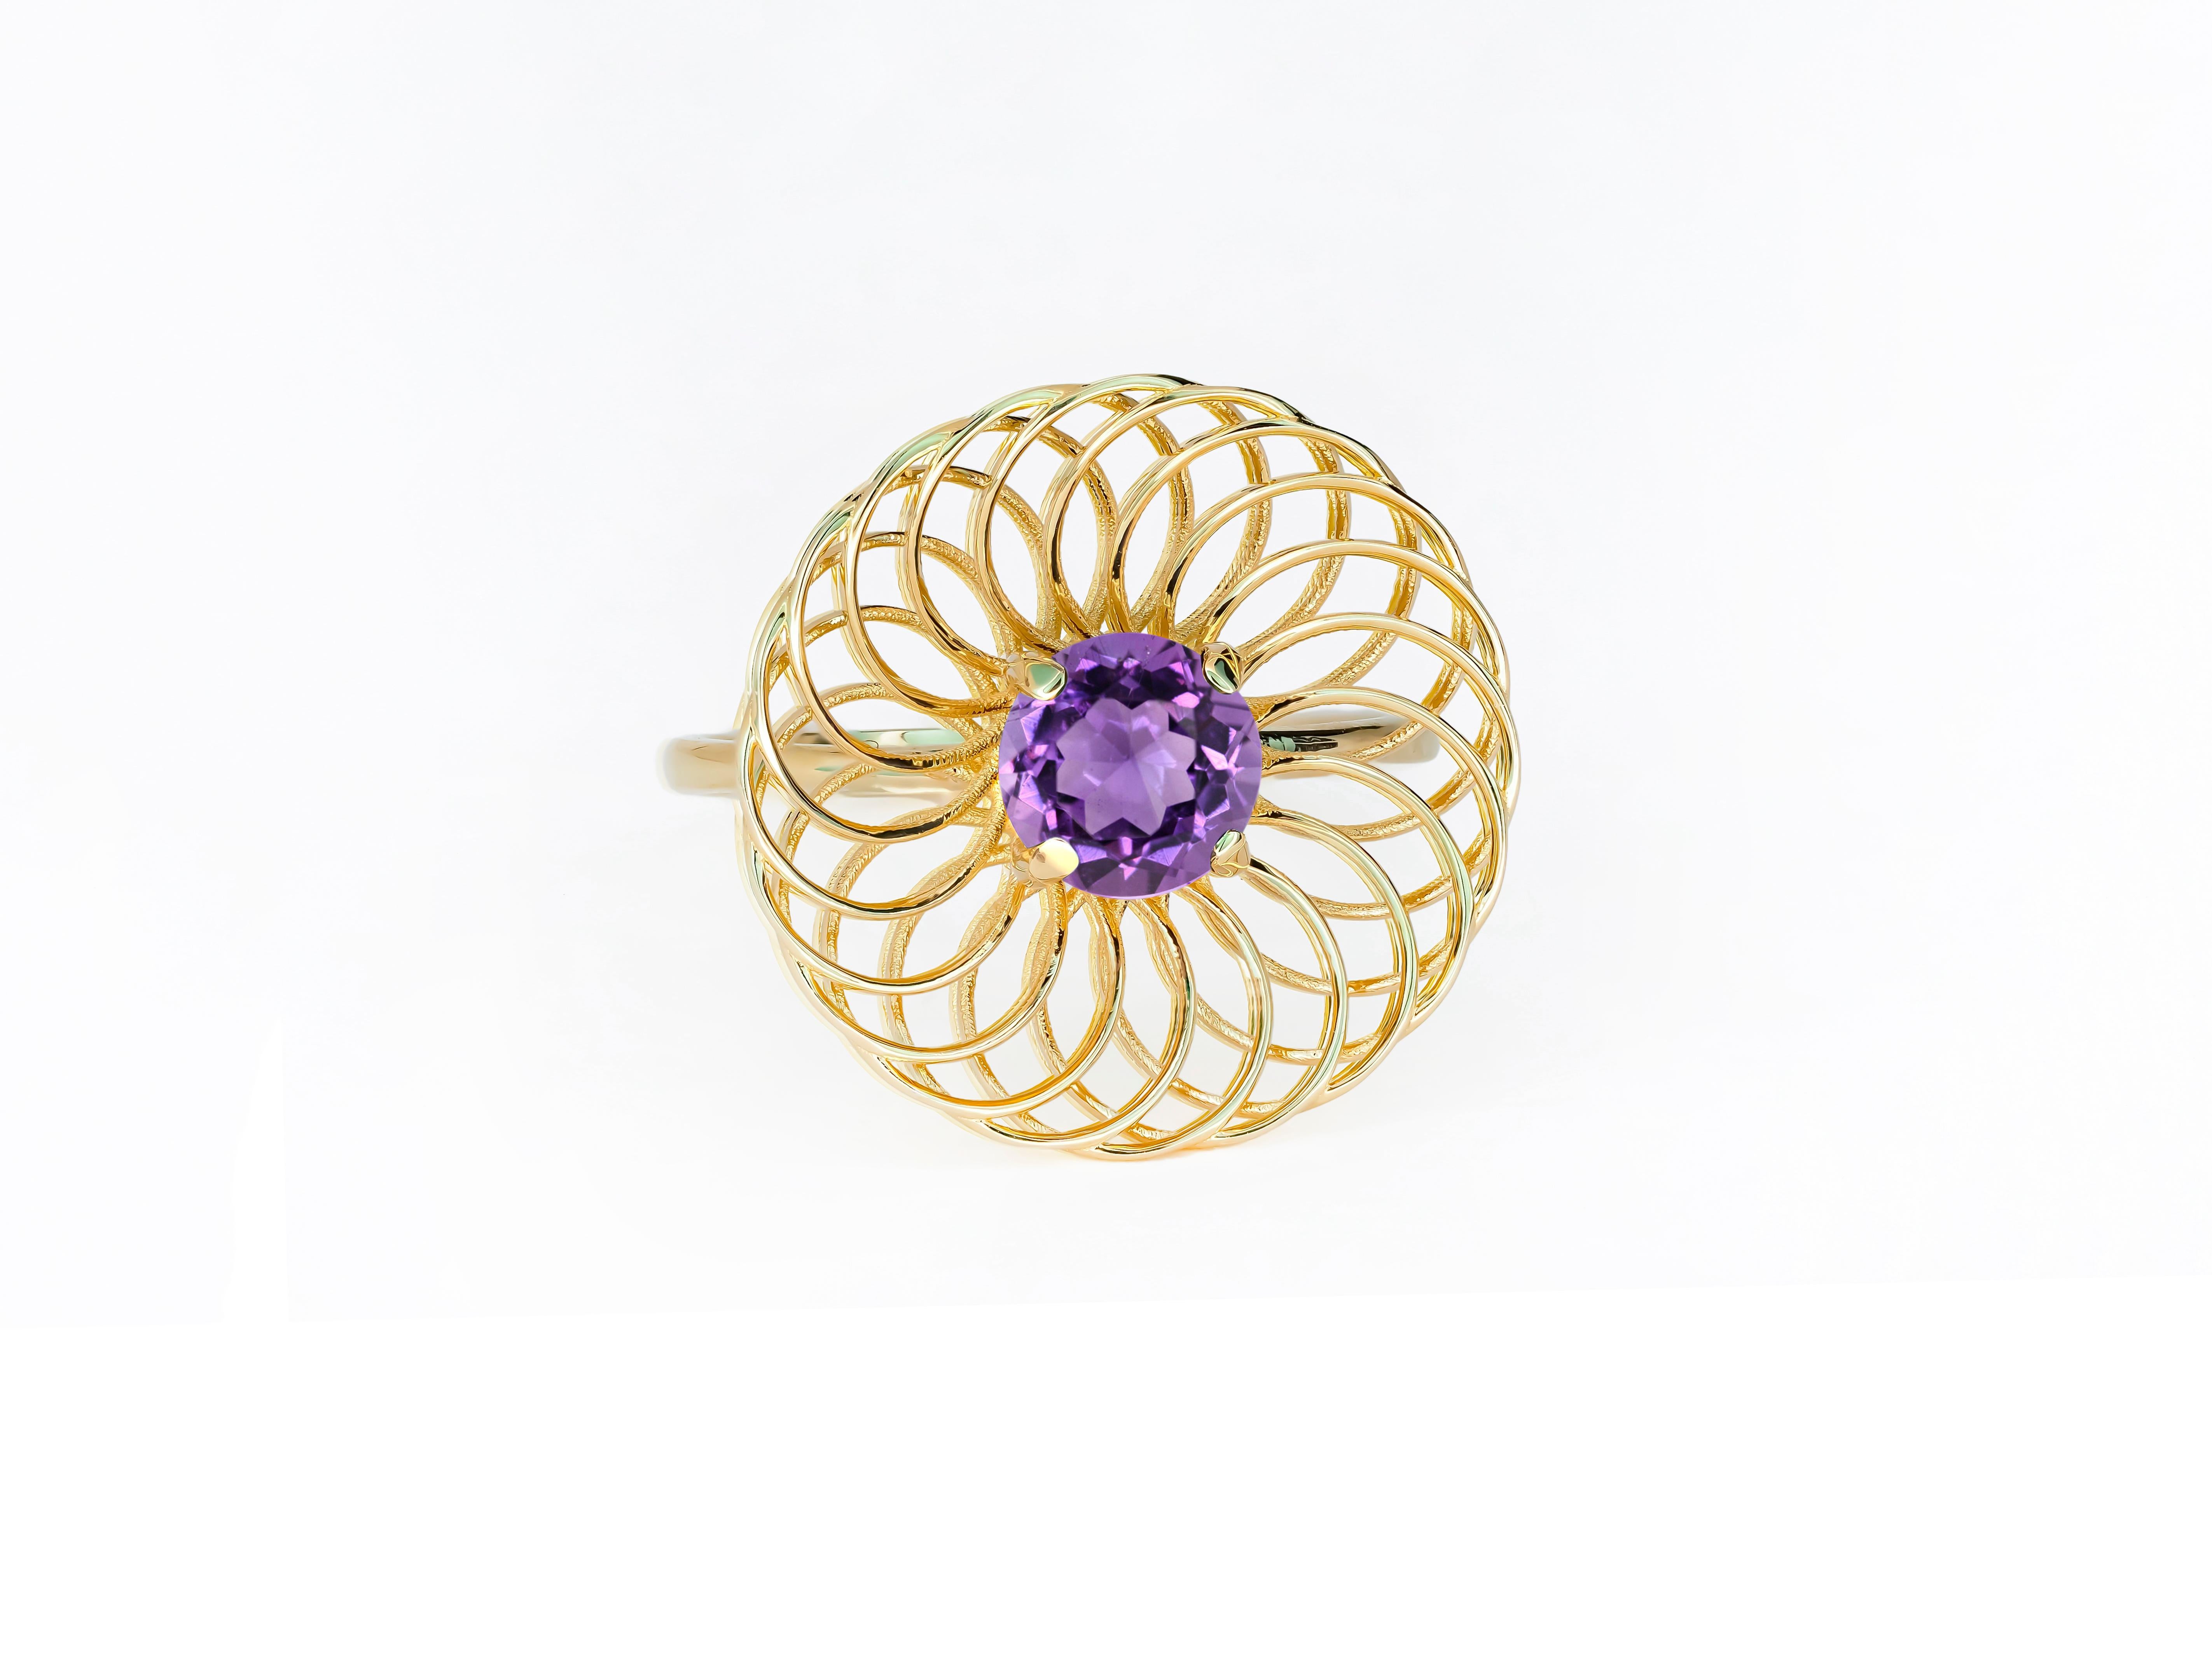 Casual amethyst 14k gold ring. 
Everyday amethyst ring. Round amethyst 14k gold ring. Amethyst engagement ring. Amethyst Geometric ring.

Metal type: 14kt solid gold
Weight 2.00 g. depends from size

Gemstones:
Central stone: Natural amethyst
Cut: